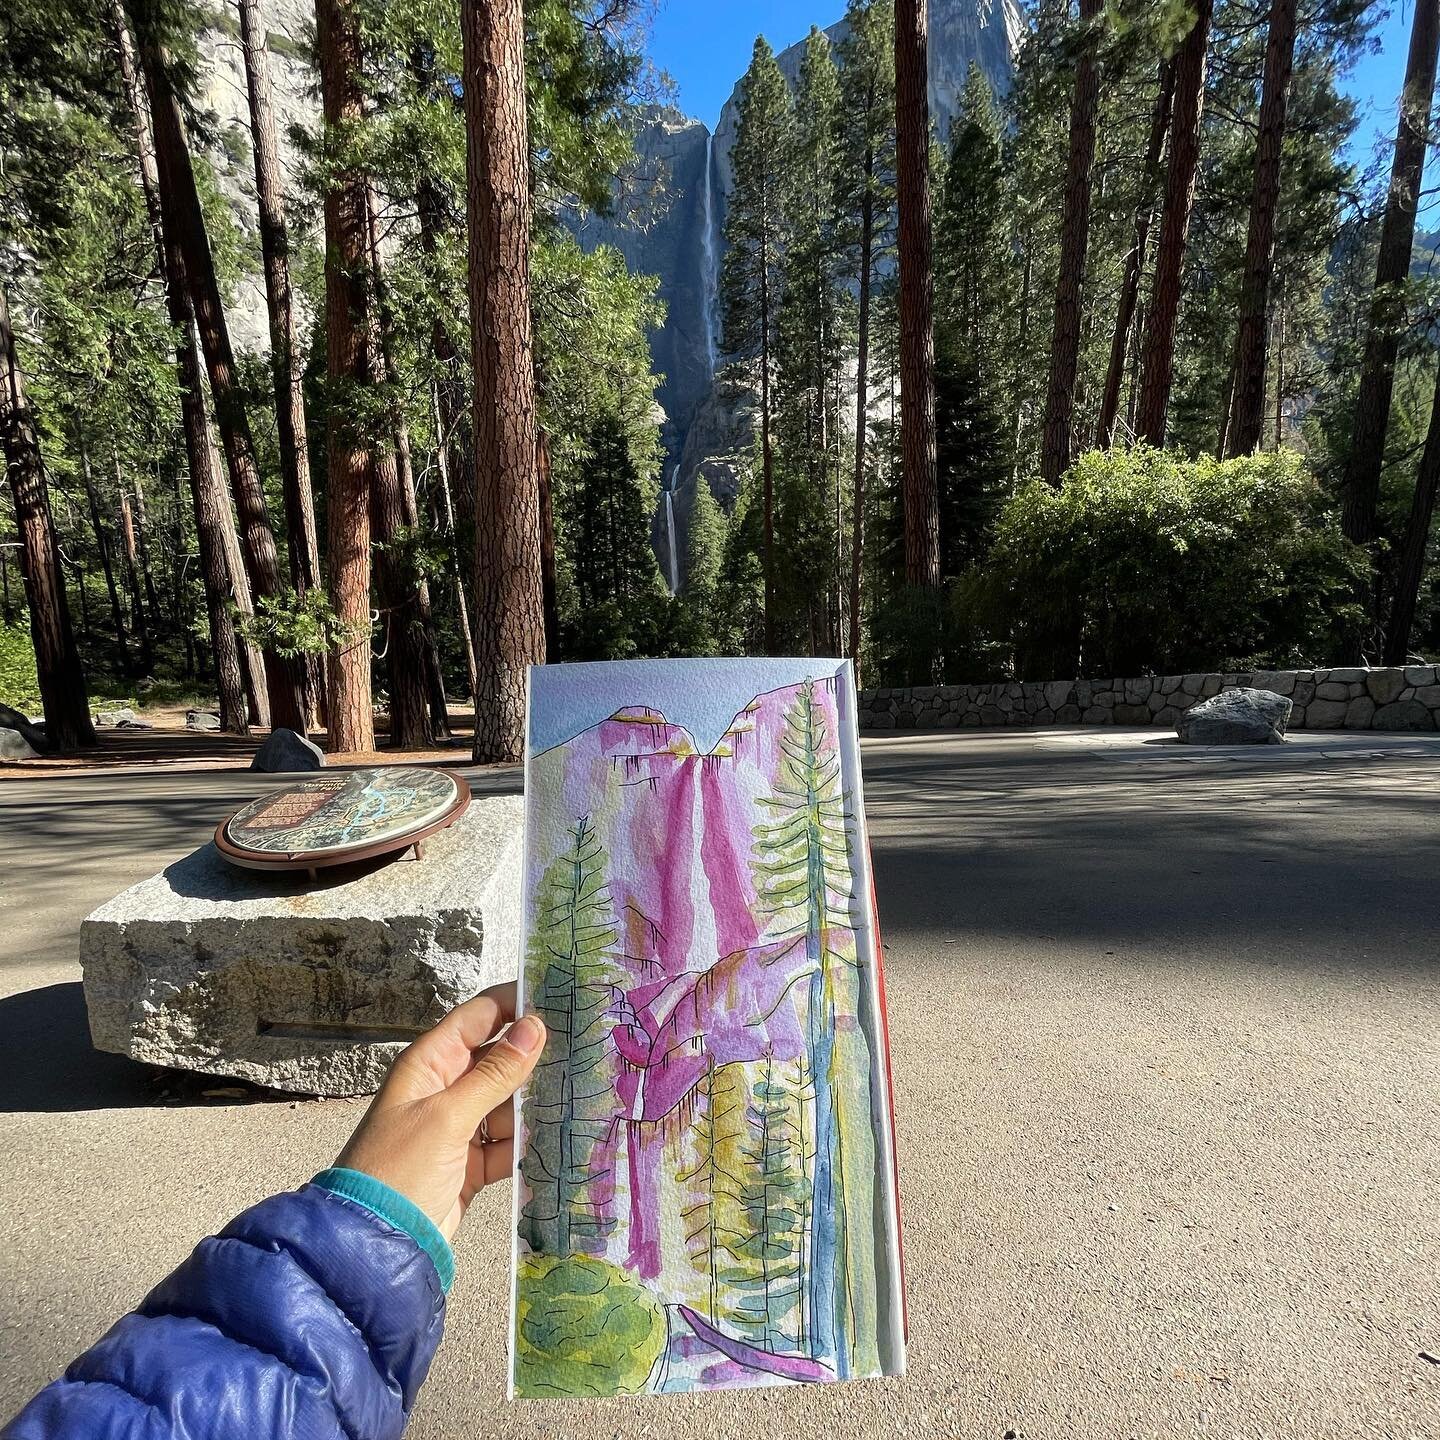 Woke up early for no reason on my last morning in #yosemitenationalpark and decided to take advantage of the early hour to do some more paintings. Pretty happy with this bright and cheery rendition of #yosemitefalls. Swipe to see the finished piece c